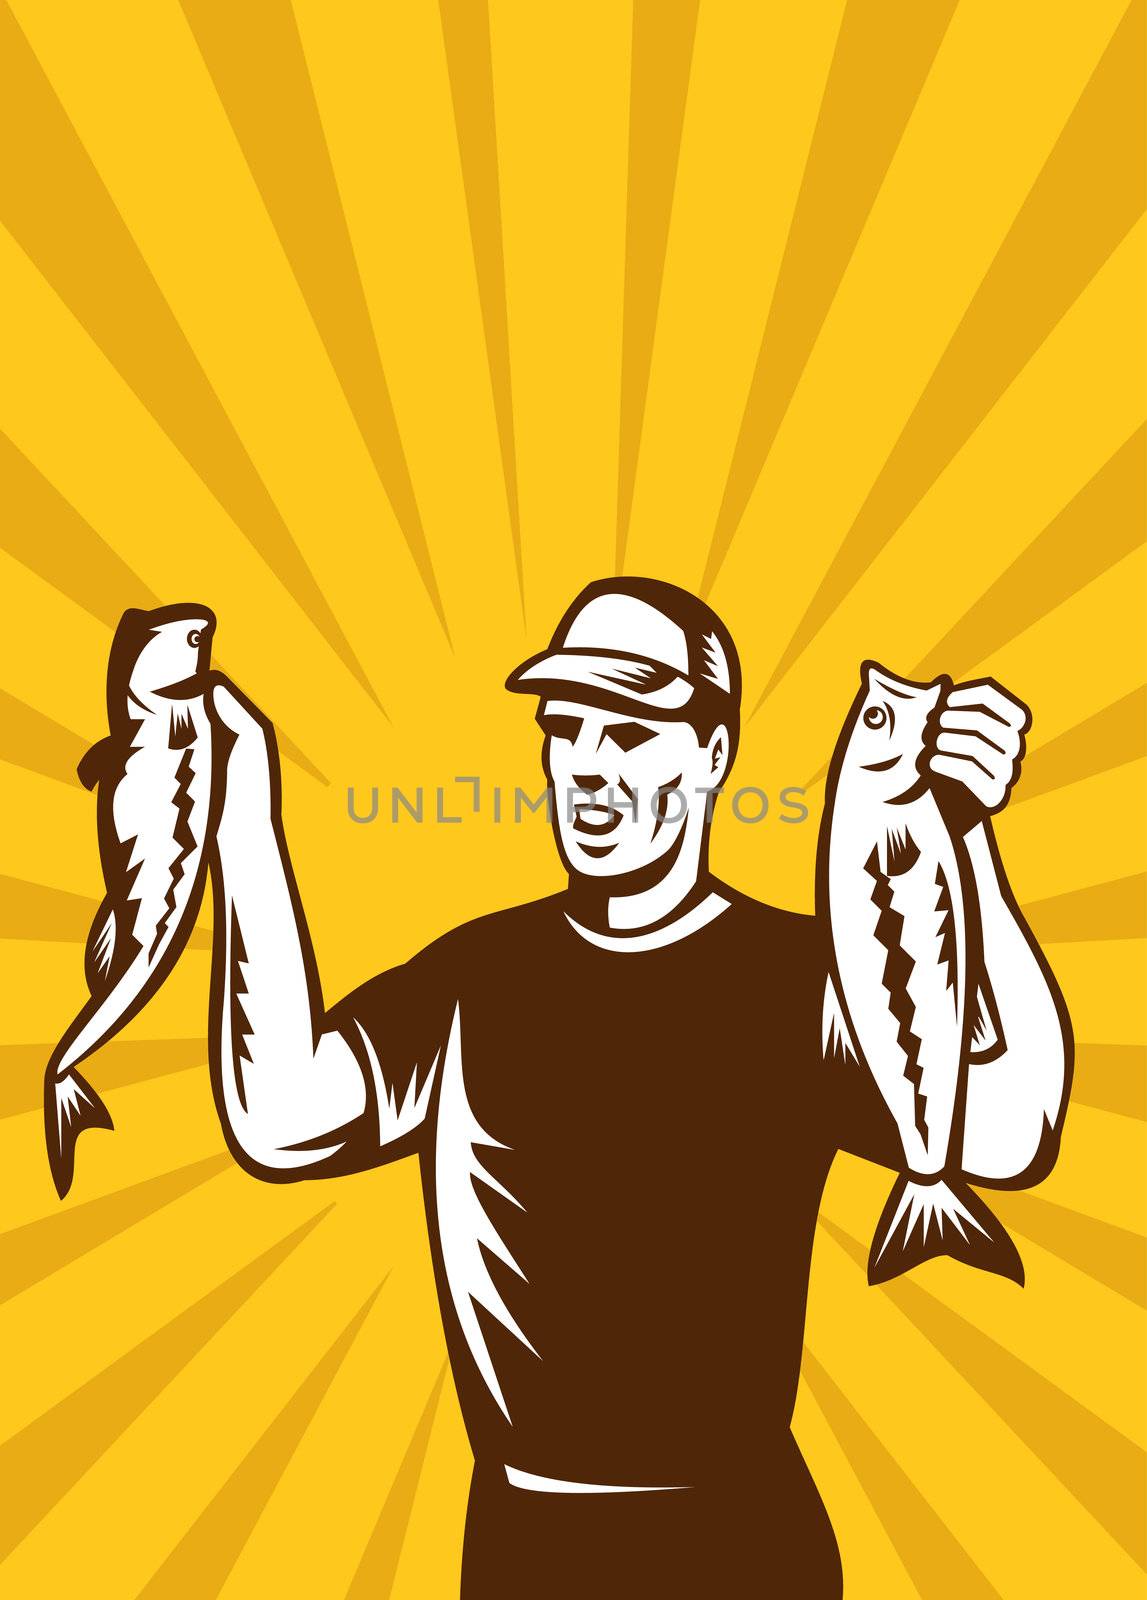 illustration of a Fly Fisherman holding up bass fish catch with sunburst in background done in retro style.